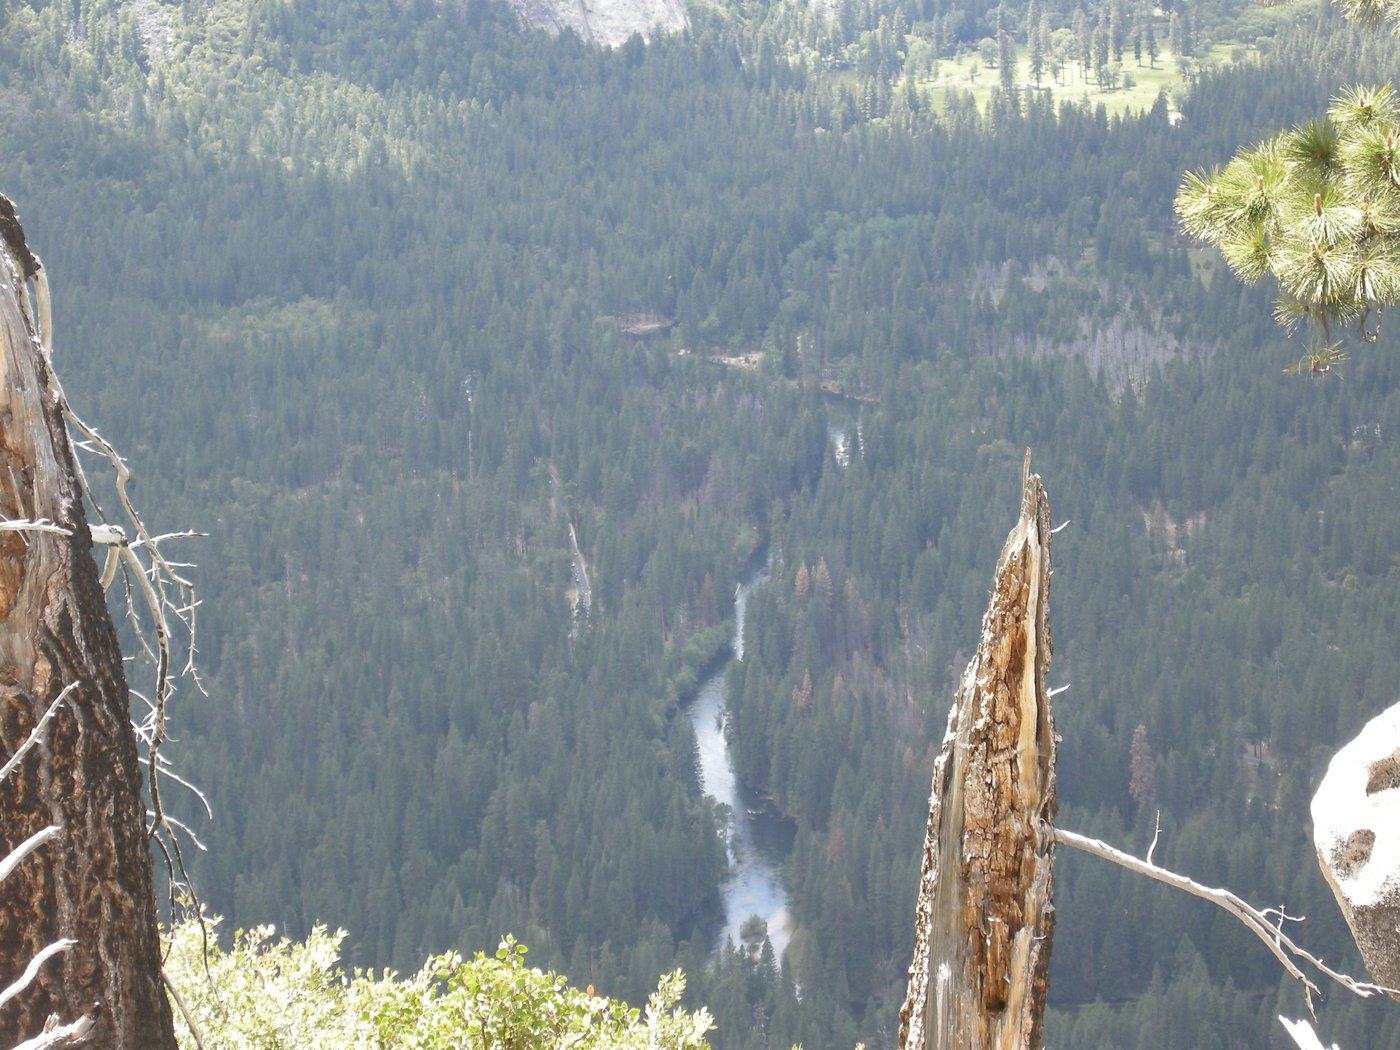 Looking down at the Merced River